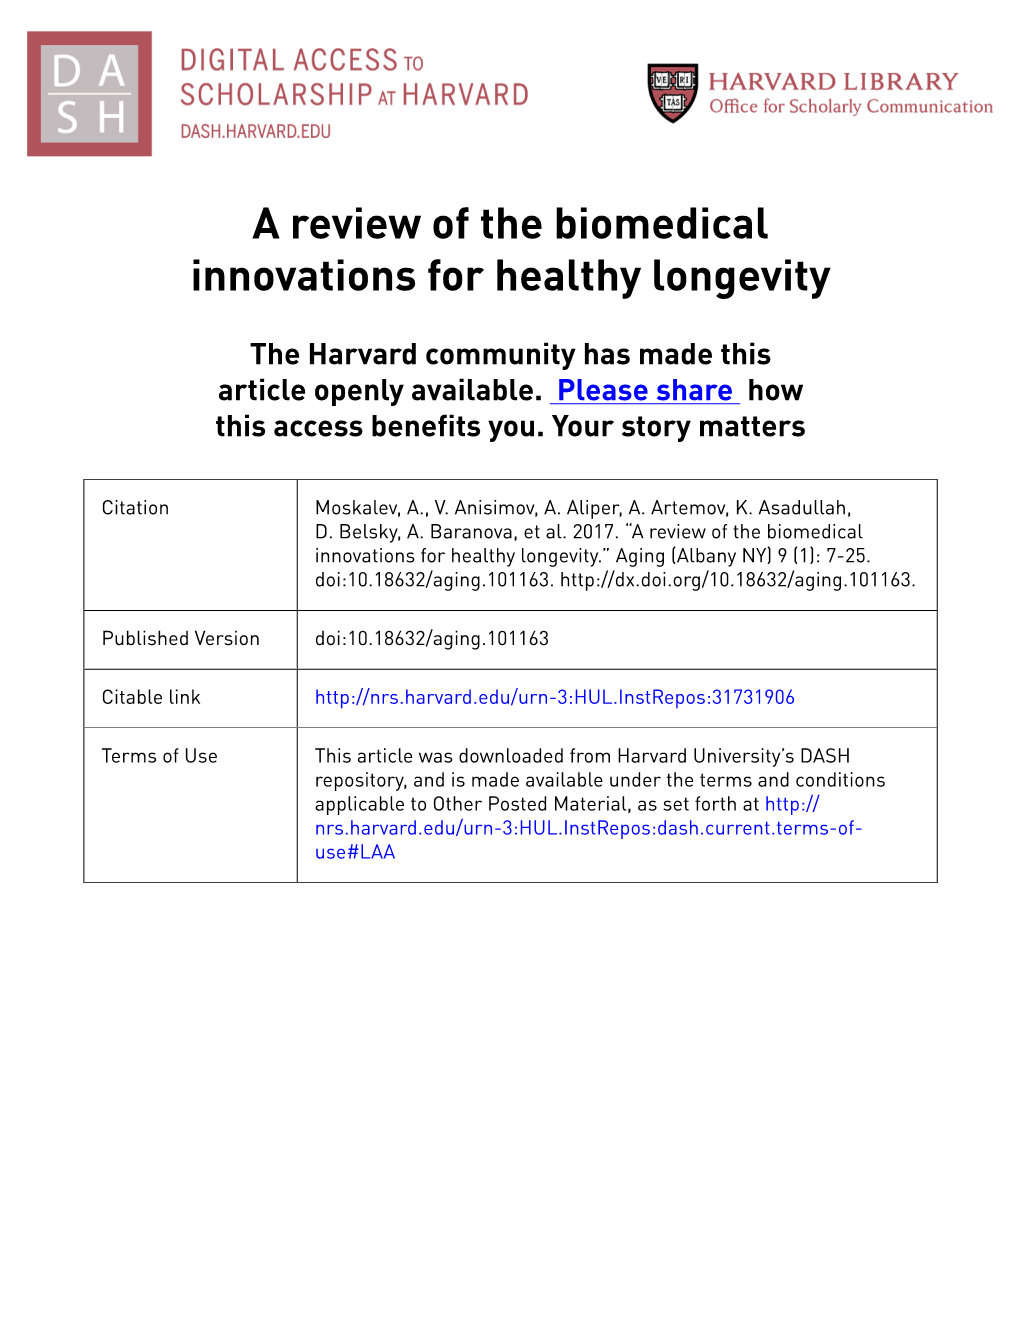 A Review of the Biomedical Innovations for Healthy Longevity